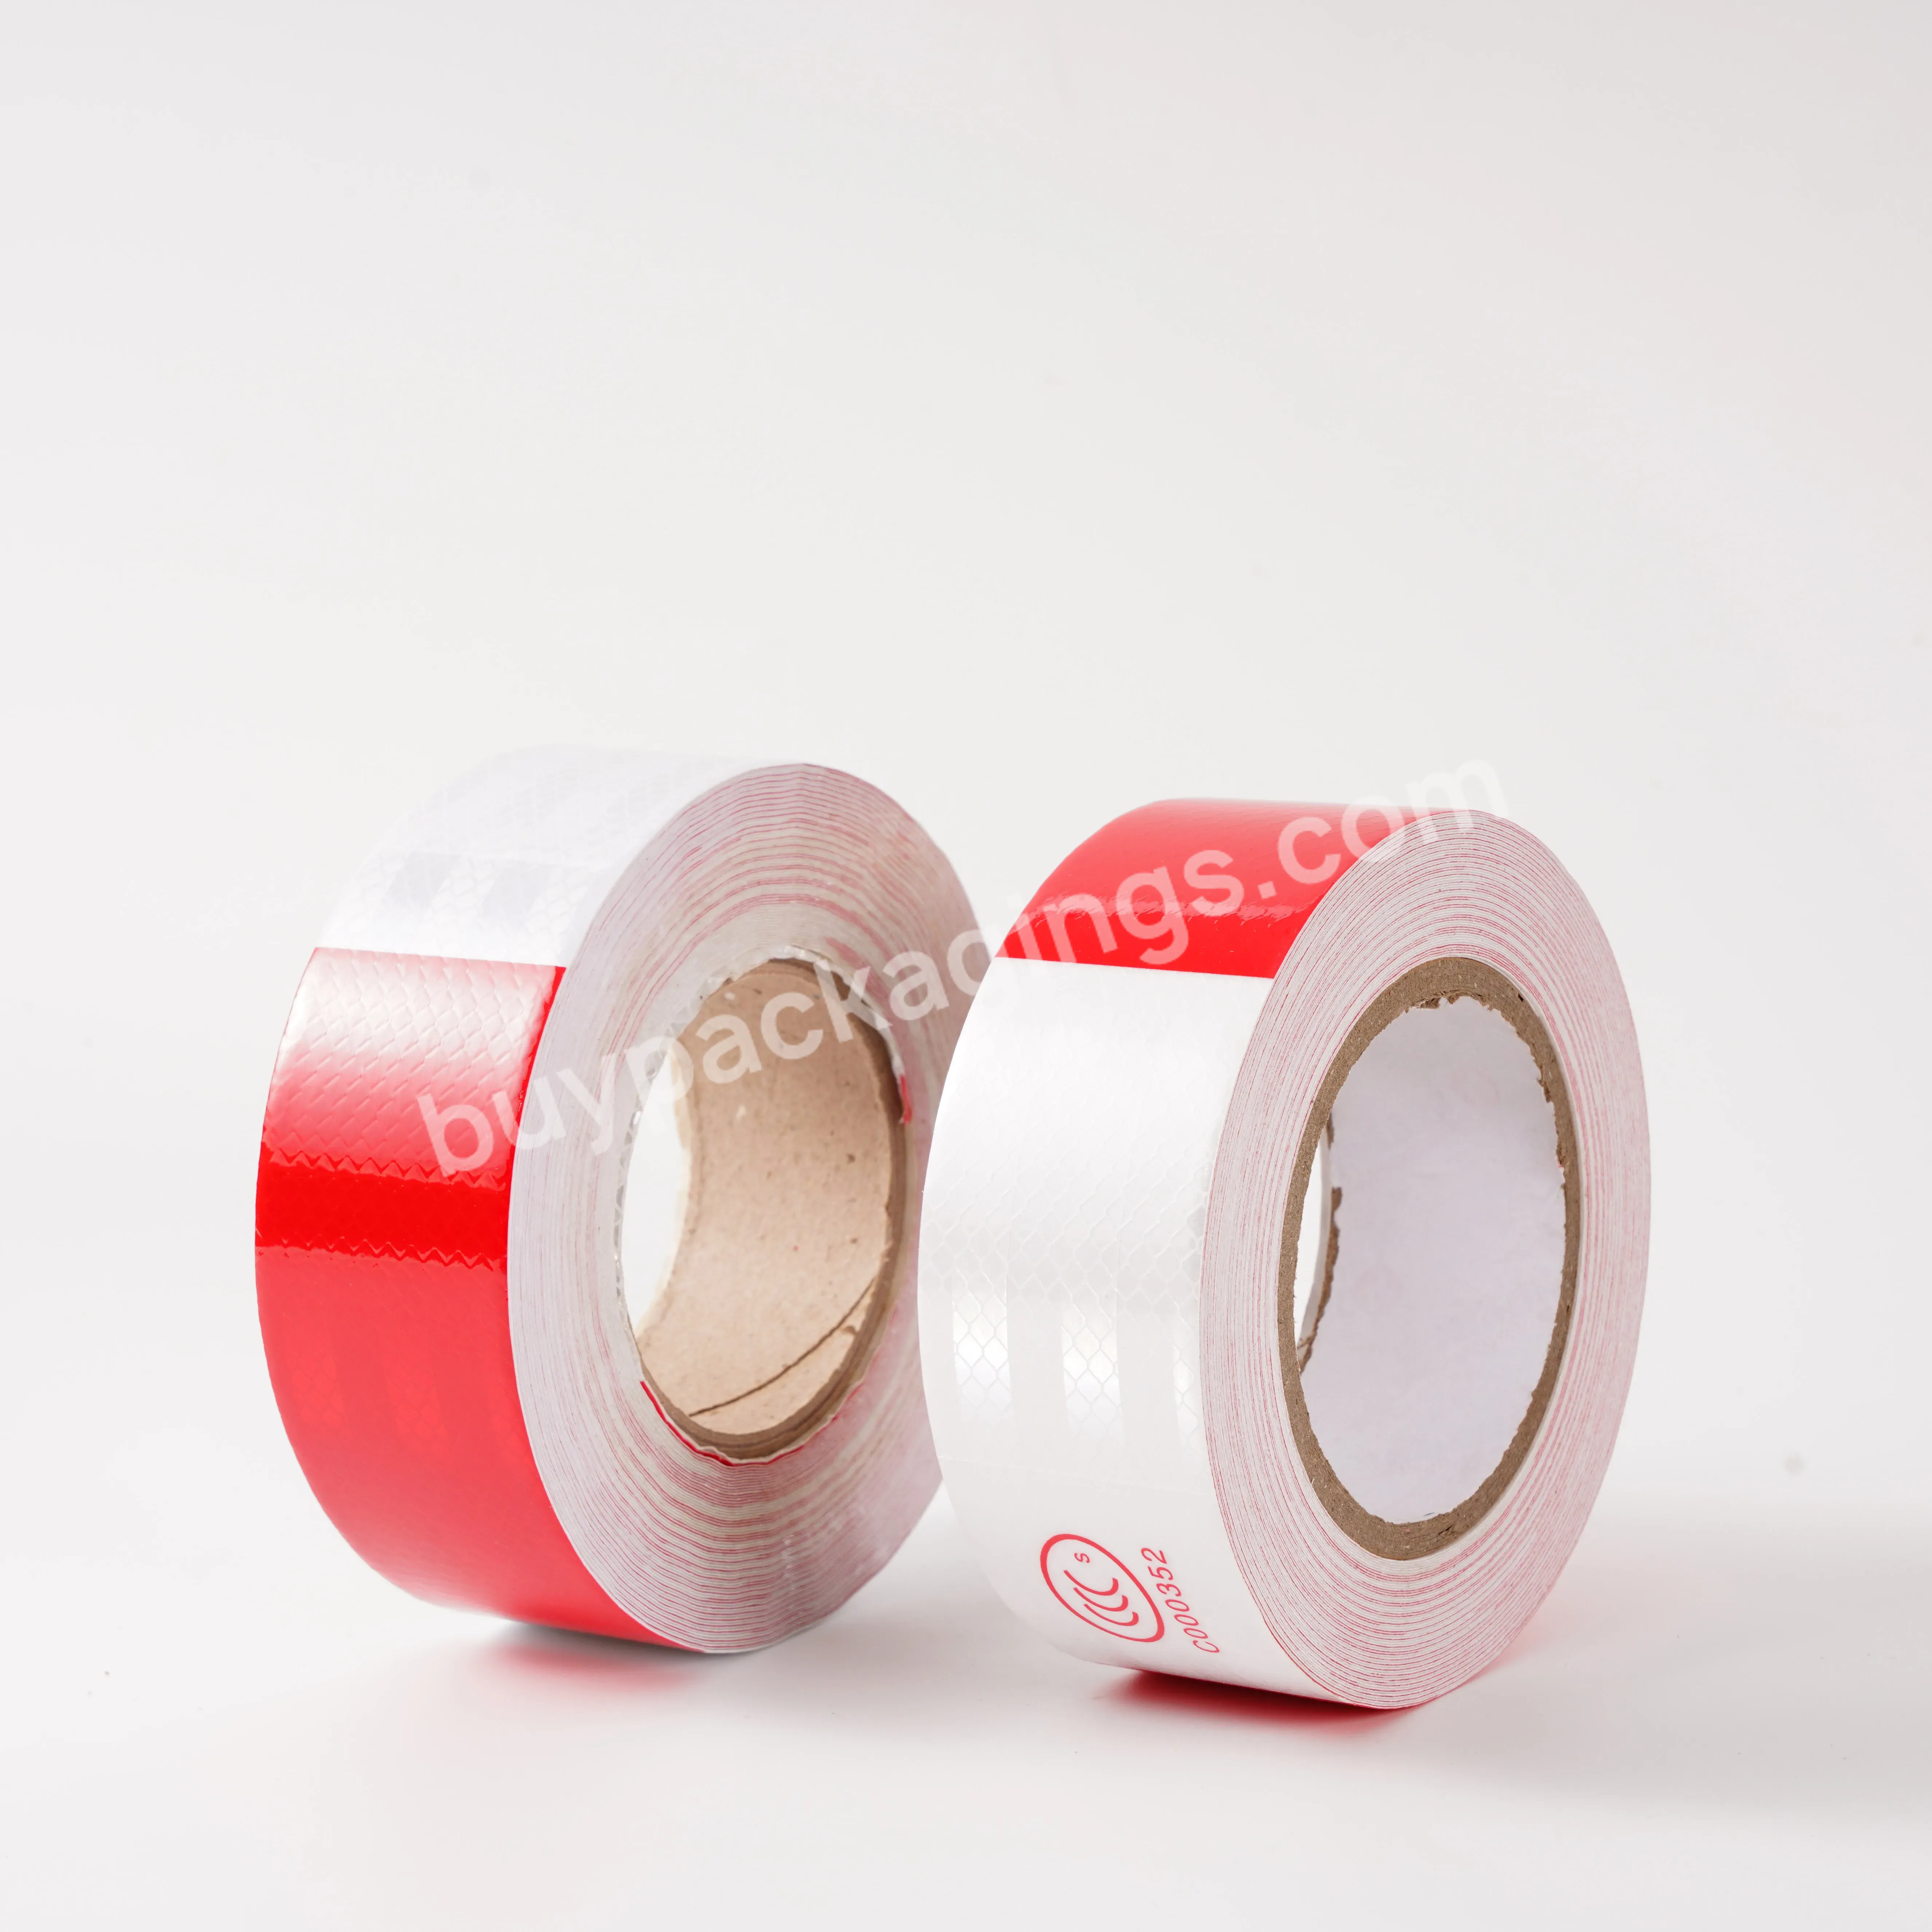 Red And White Twill Reflective Stickers Guide Signs Warning Tapes Traffic Safety Lattice Car Stickers Luminous Strip Film - Buy Reflective Red White Tape,For Truck And Trailer Vehicle Car Body Warning Tape,Adhesive Stickers.